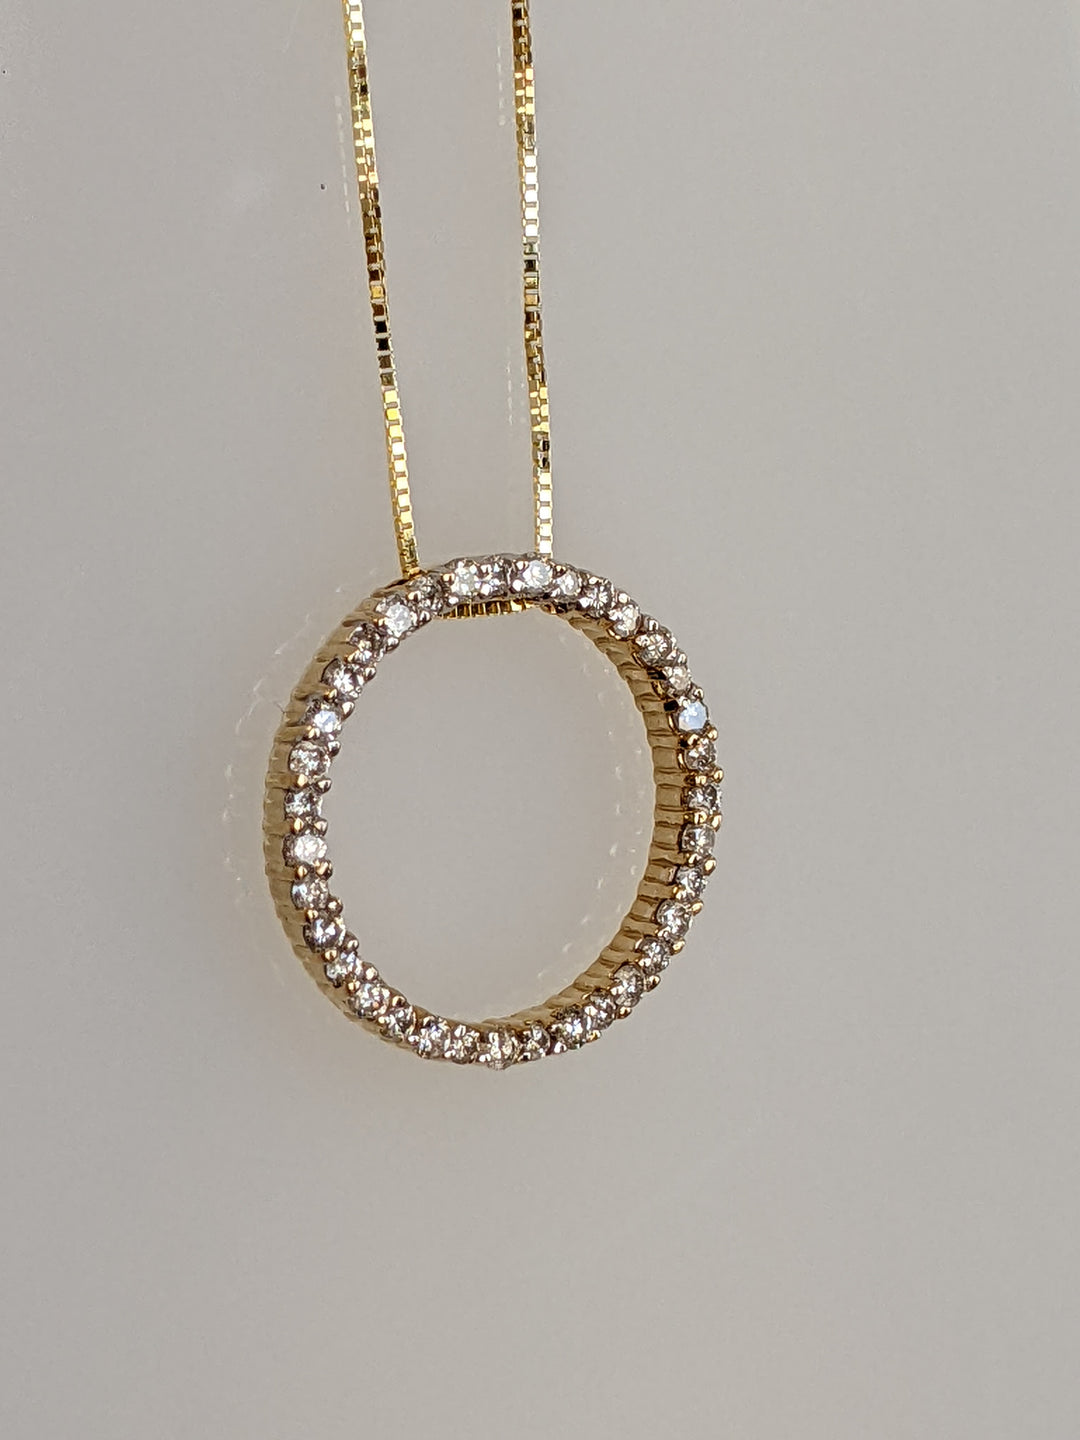 14K .54 CARAT TOTAL WEIGHT I1 H DIAMOND ROUND (36) ESTATE PENDANT AND CHAIN 4.8 GRAMS